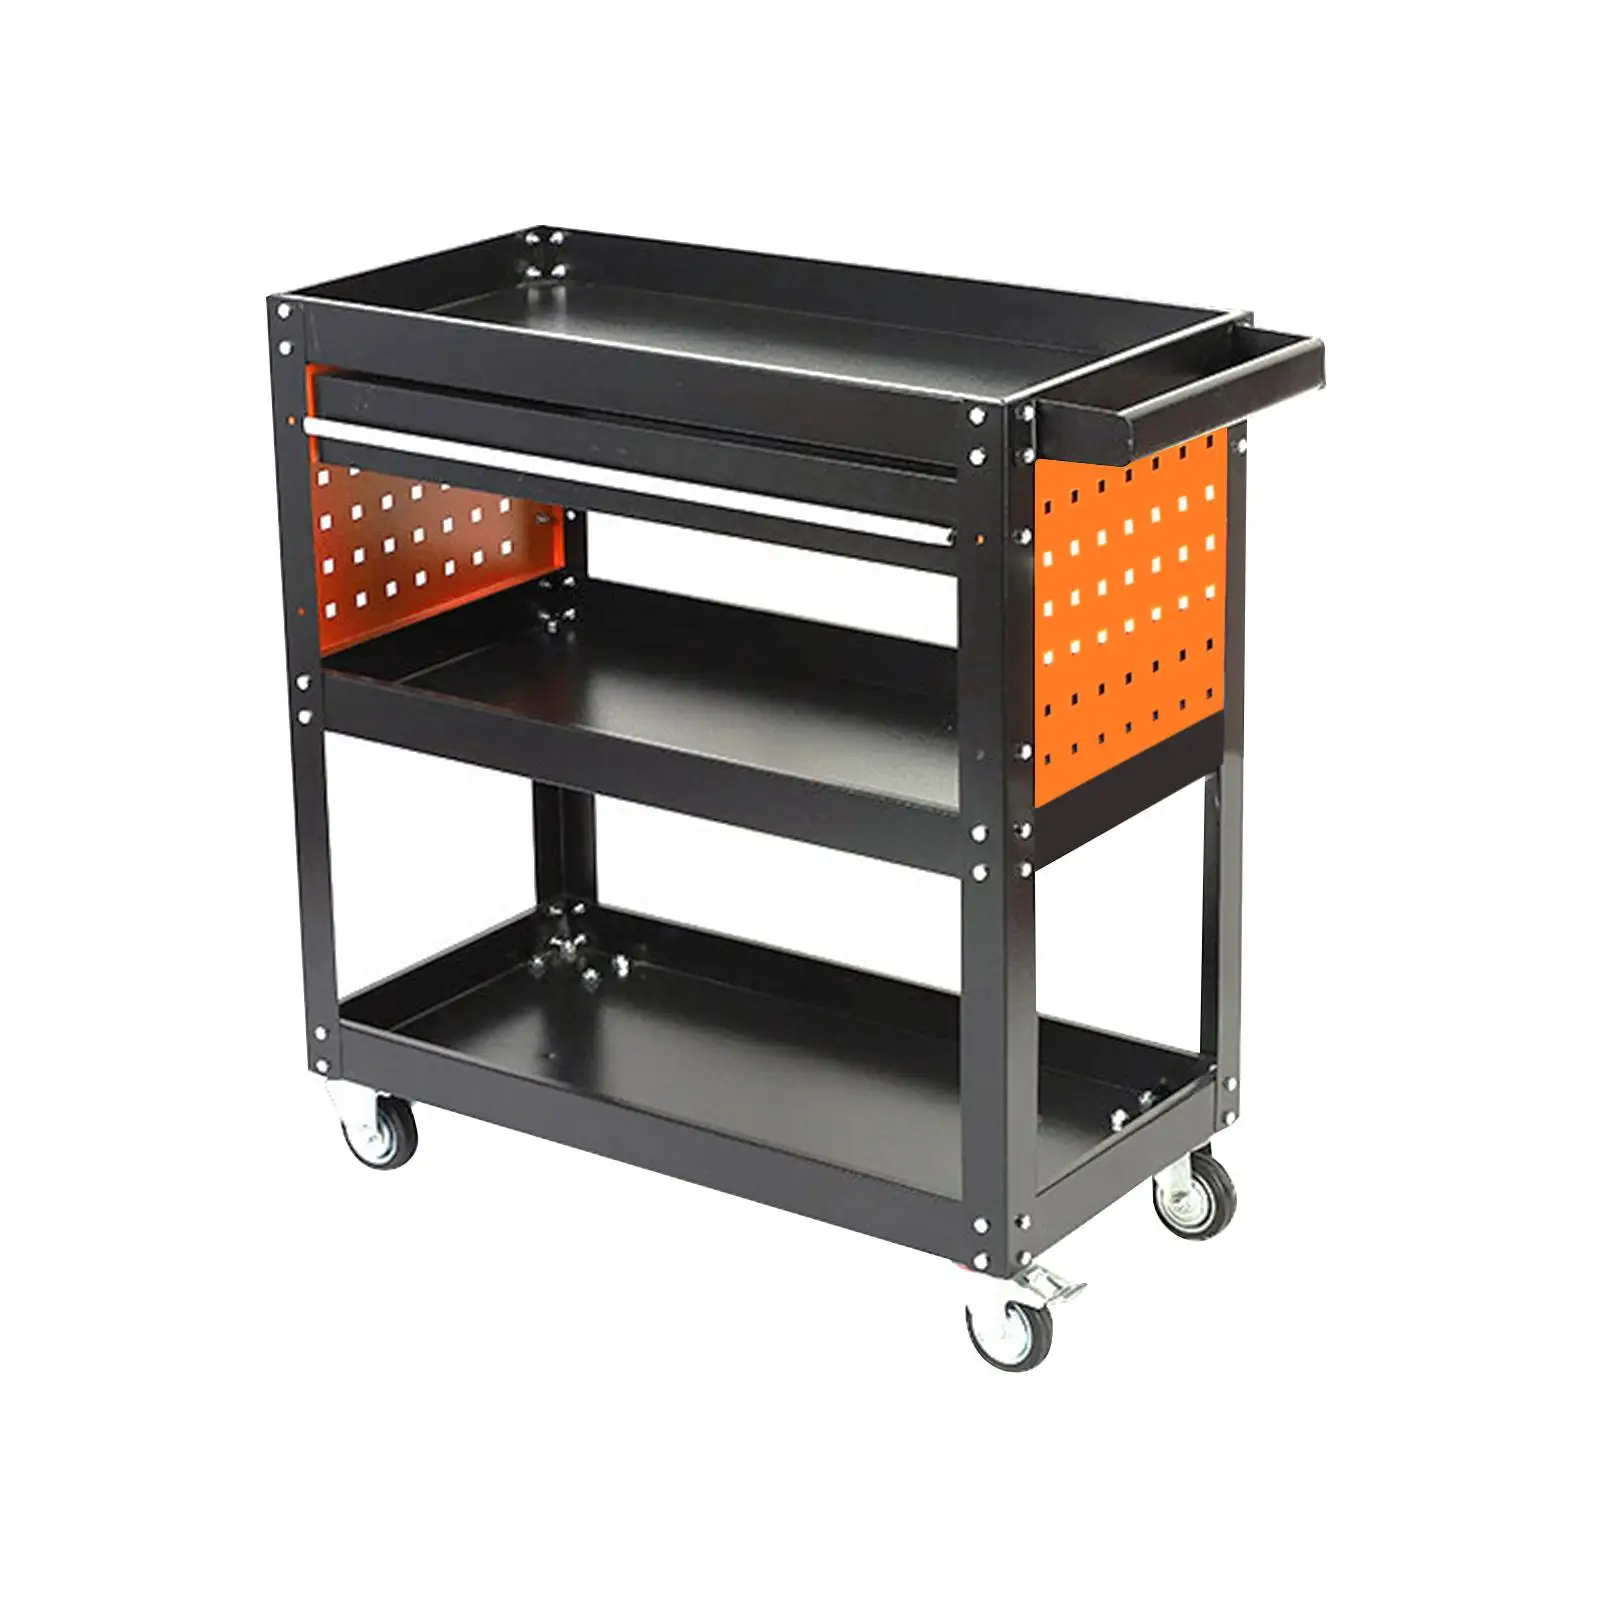 Trolley Tool Cart Heavy Duty Multifunction Organizer with Wheels Service Cart for Garage